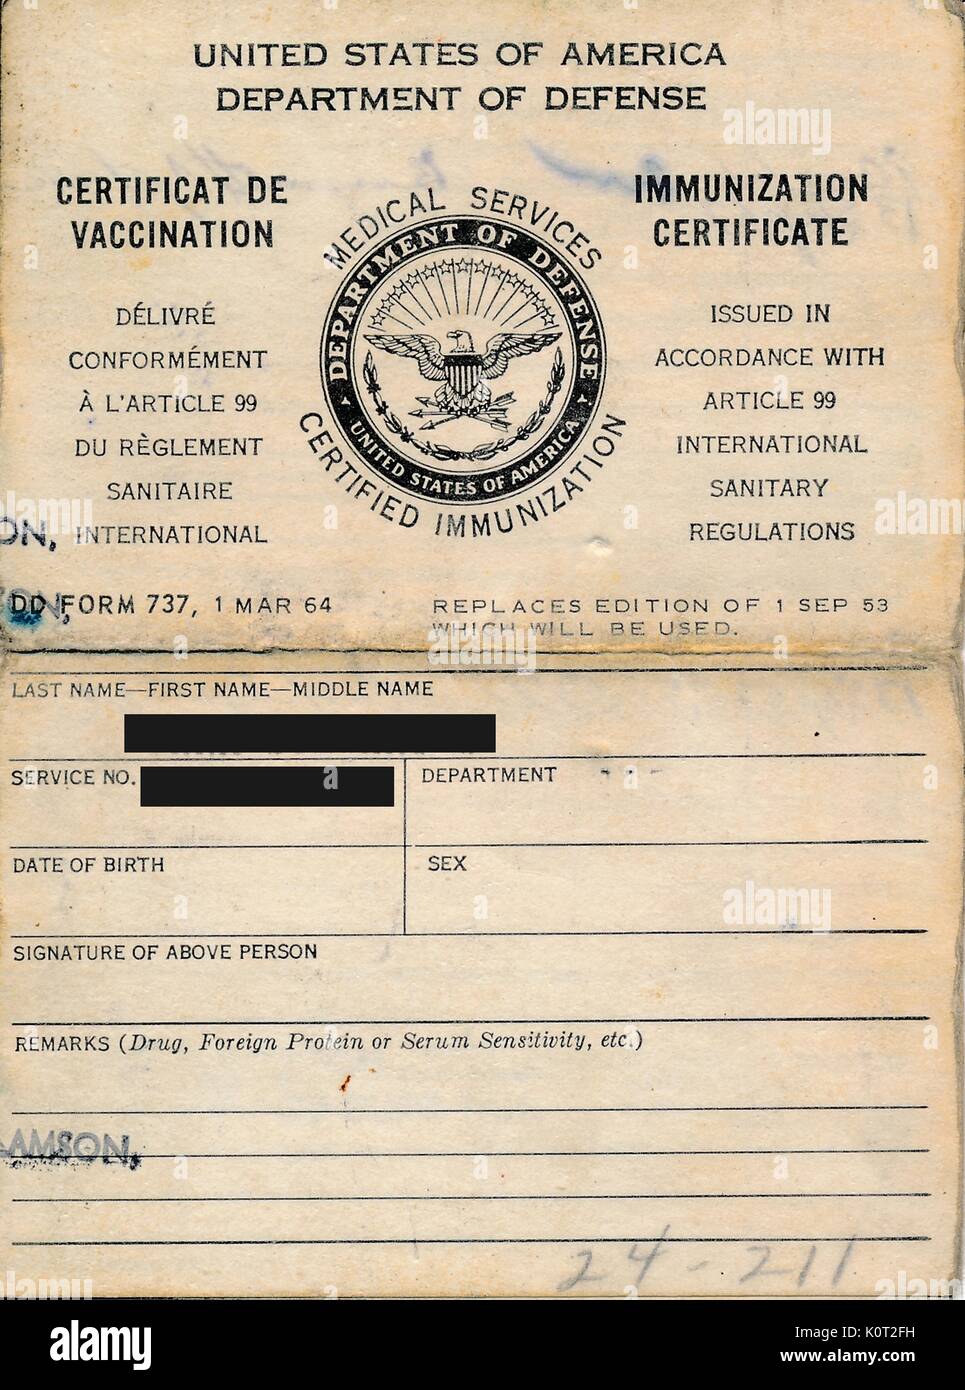 United States Department of Defense medical services immunization certificate, listing the name and identity of a soldier who has been vaccinated prior to being stationed in Vietnam during the Vietnam War (identity of soldier redacted on digital artifact to protect privacy), 1964. Stock Photo